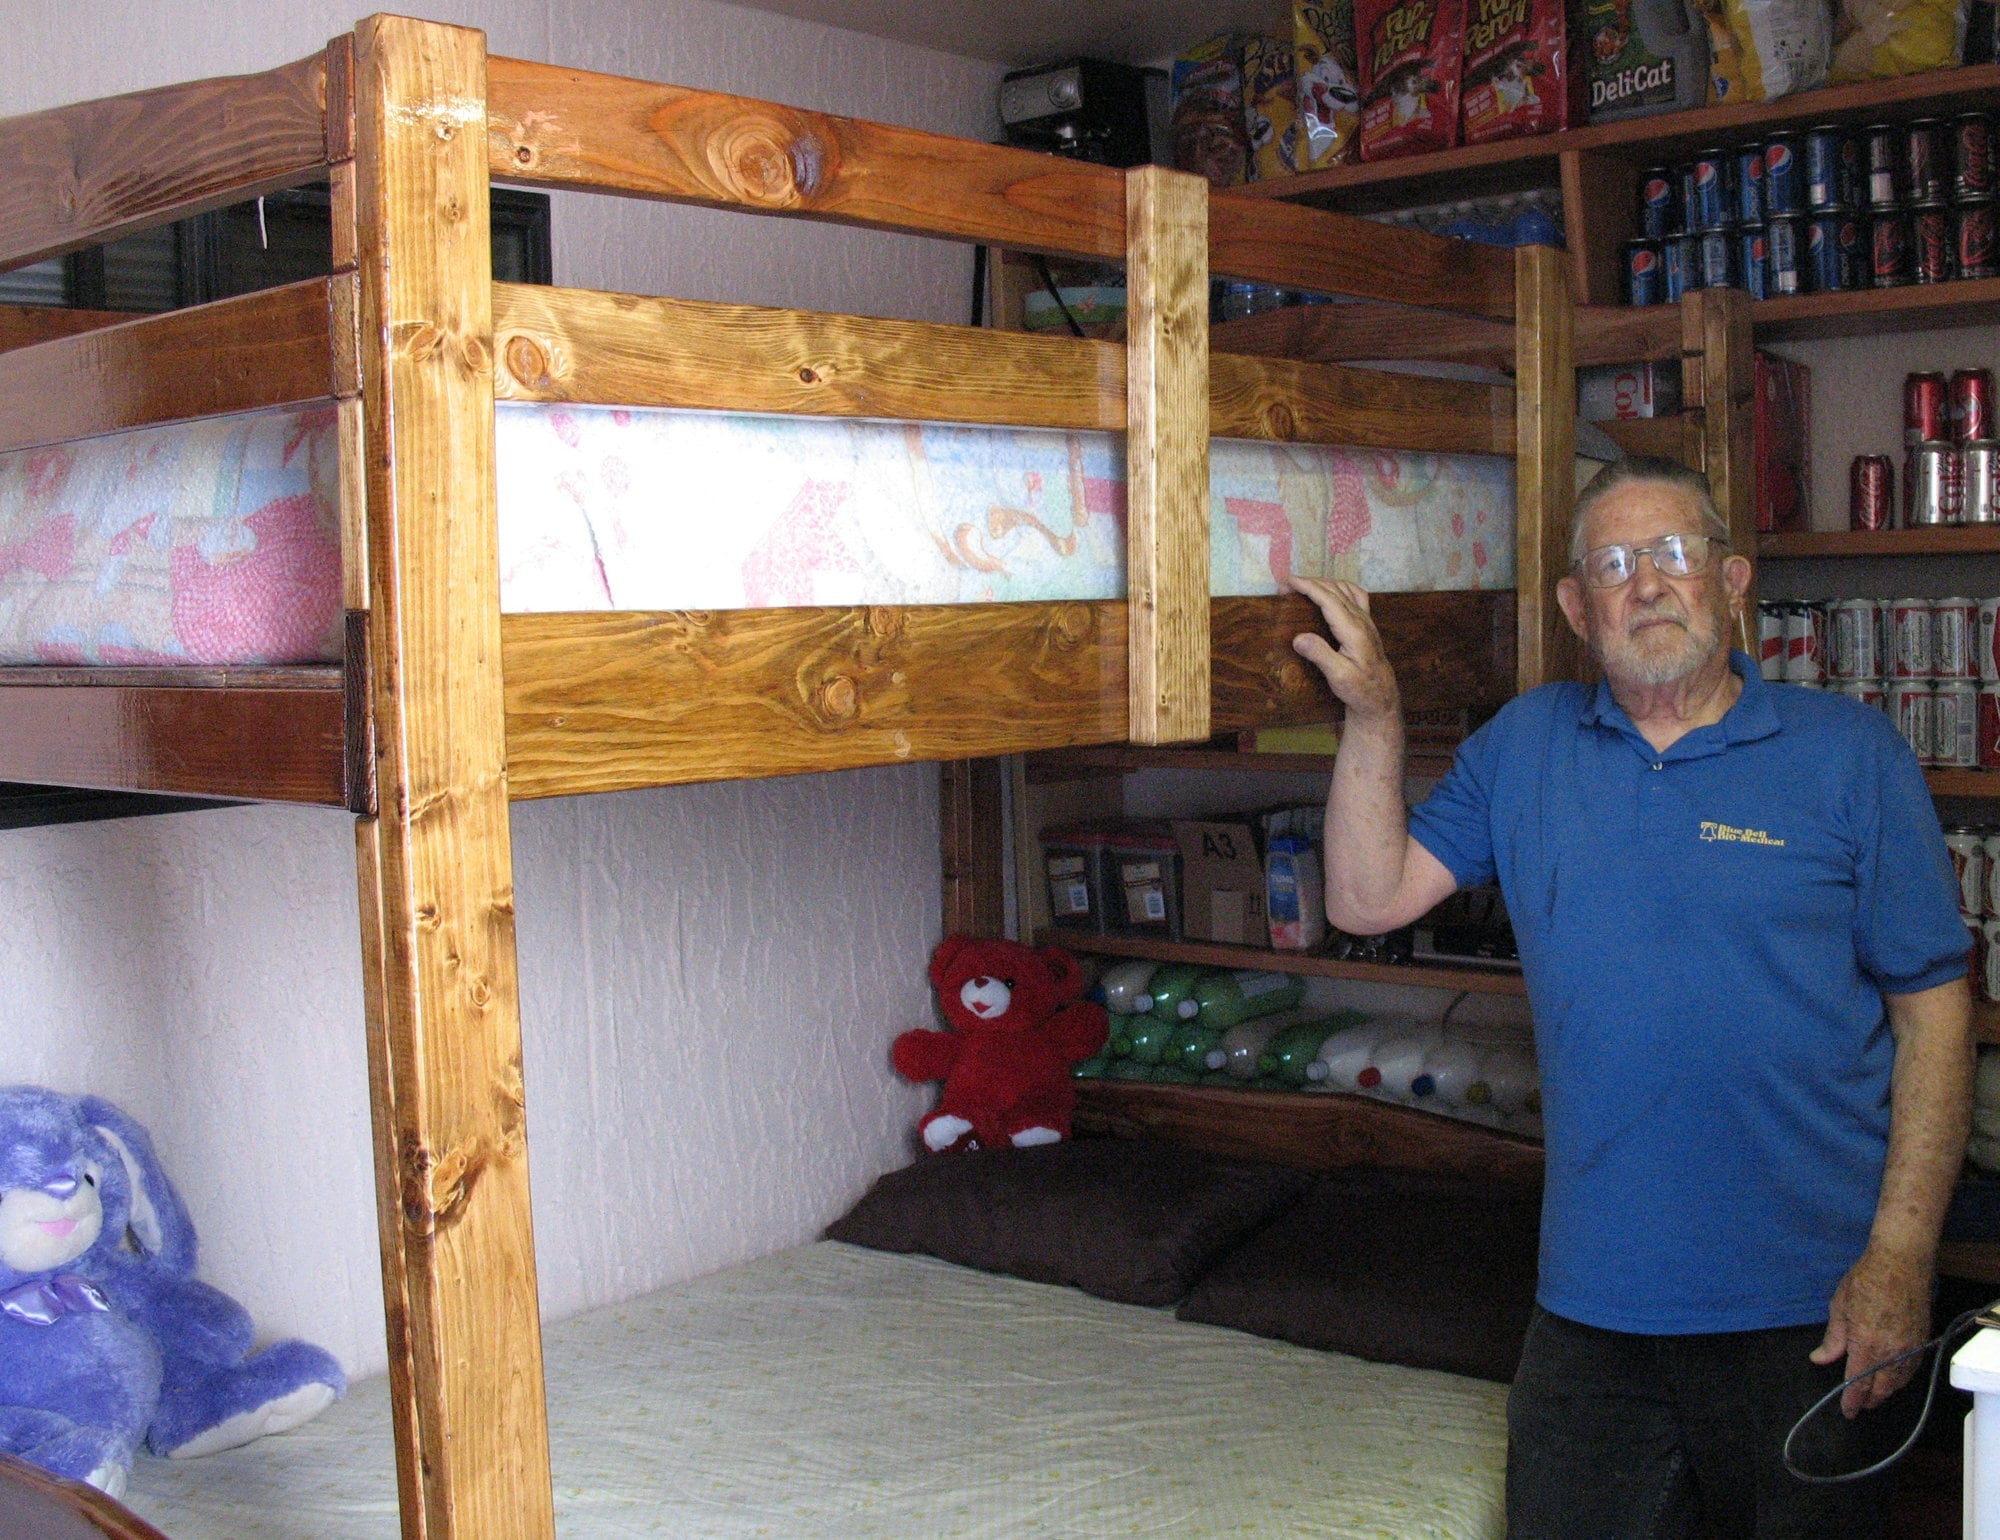 Twin over king bunk bed #bunkbed #custombunkbed  Custom bunk beds, Diy  bunk bed, Queen bunk beds